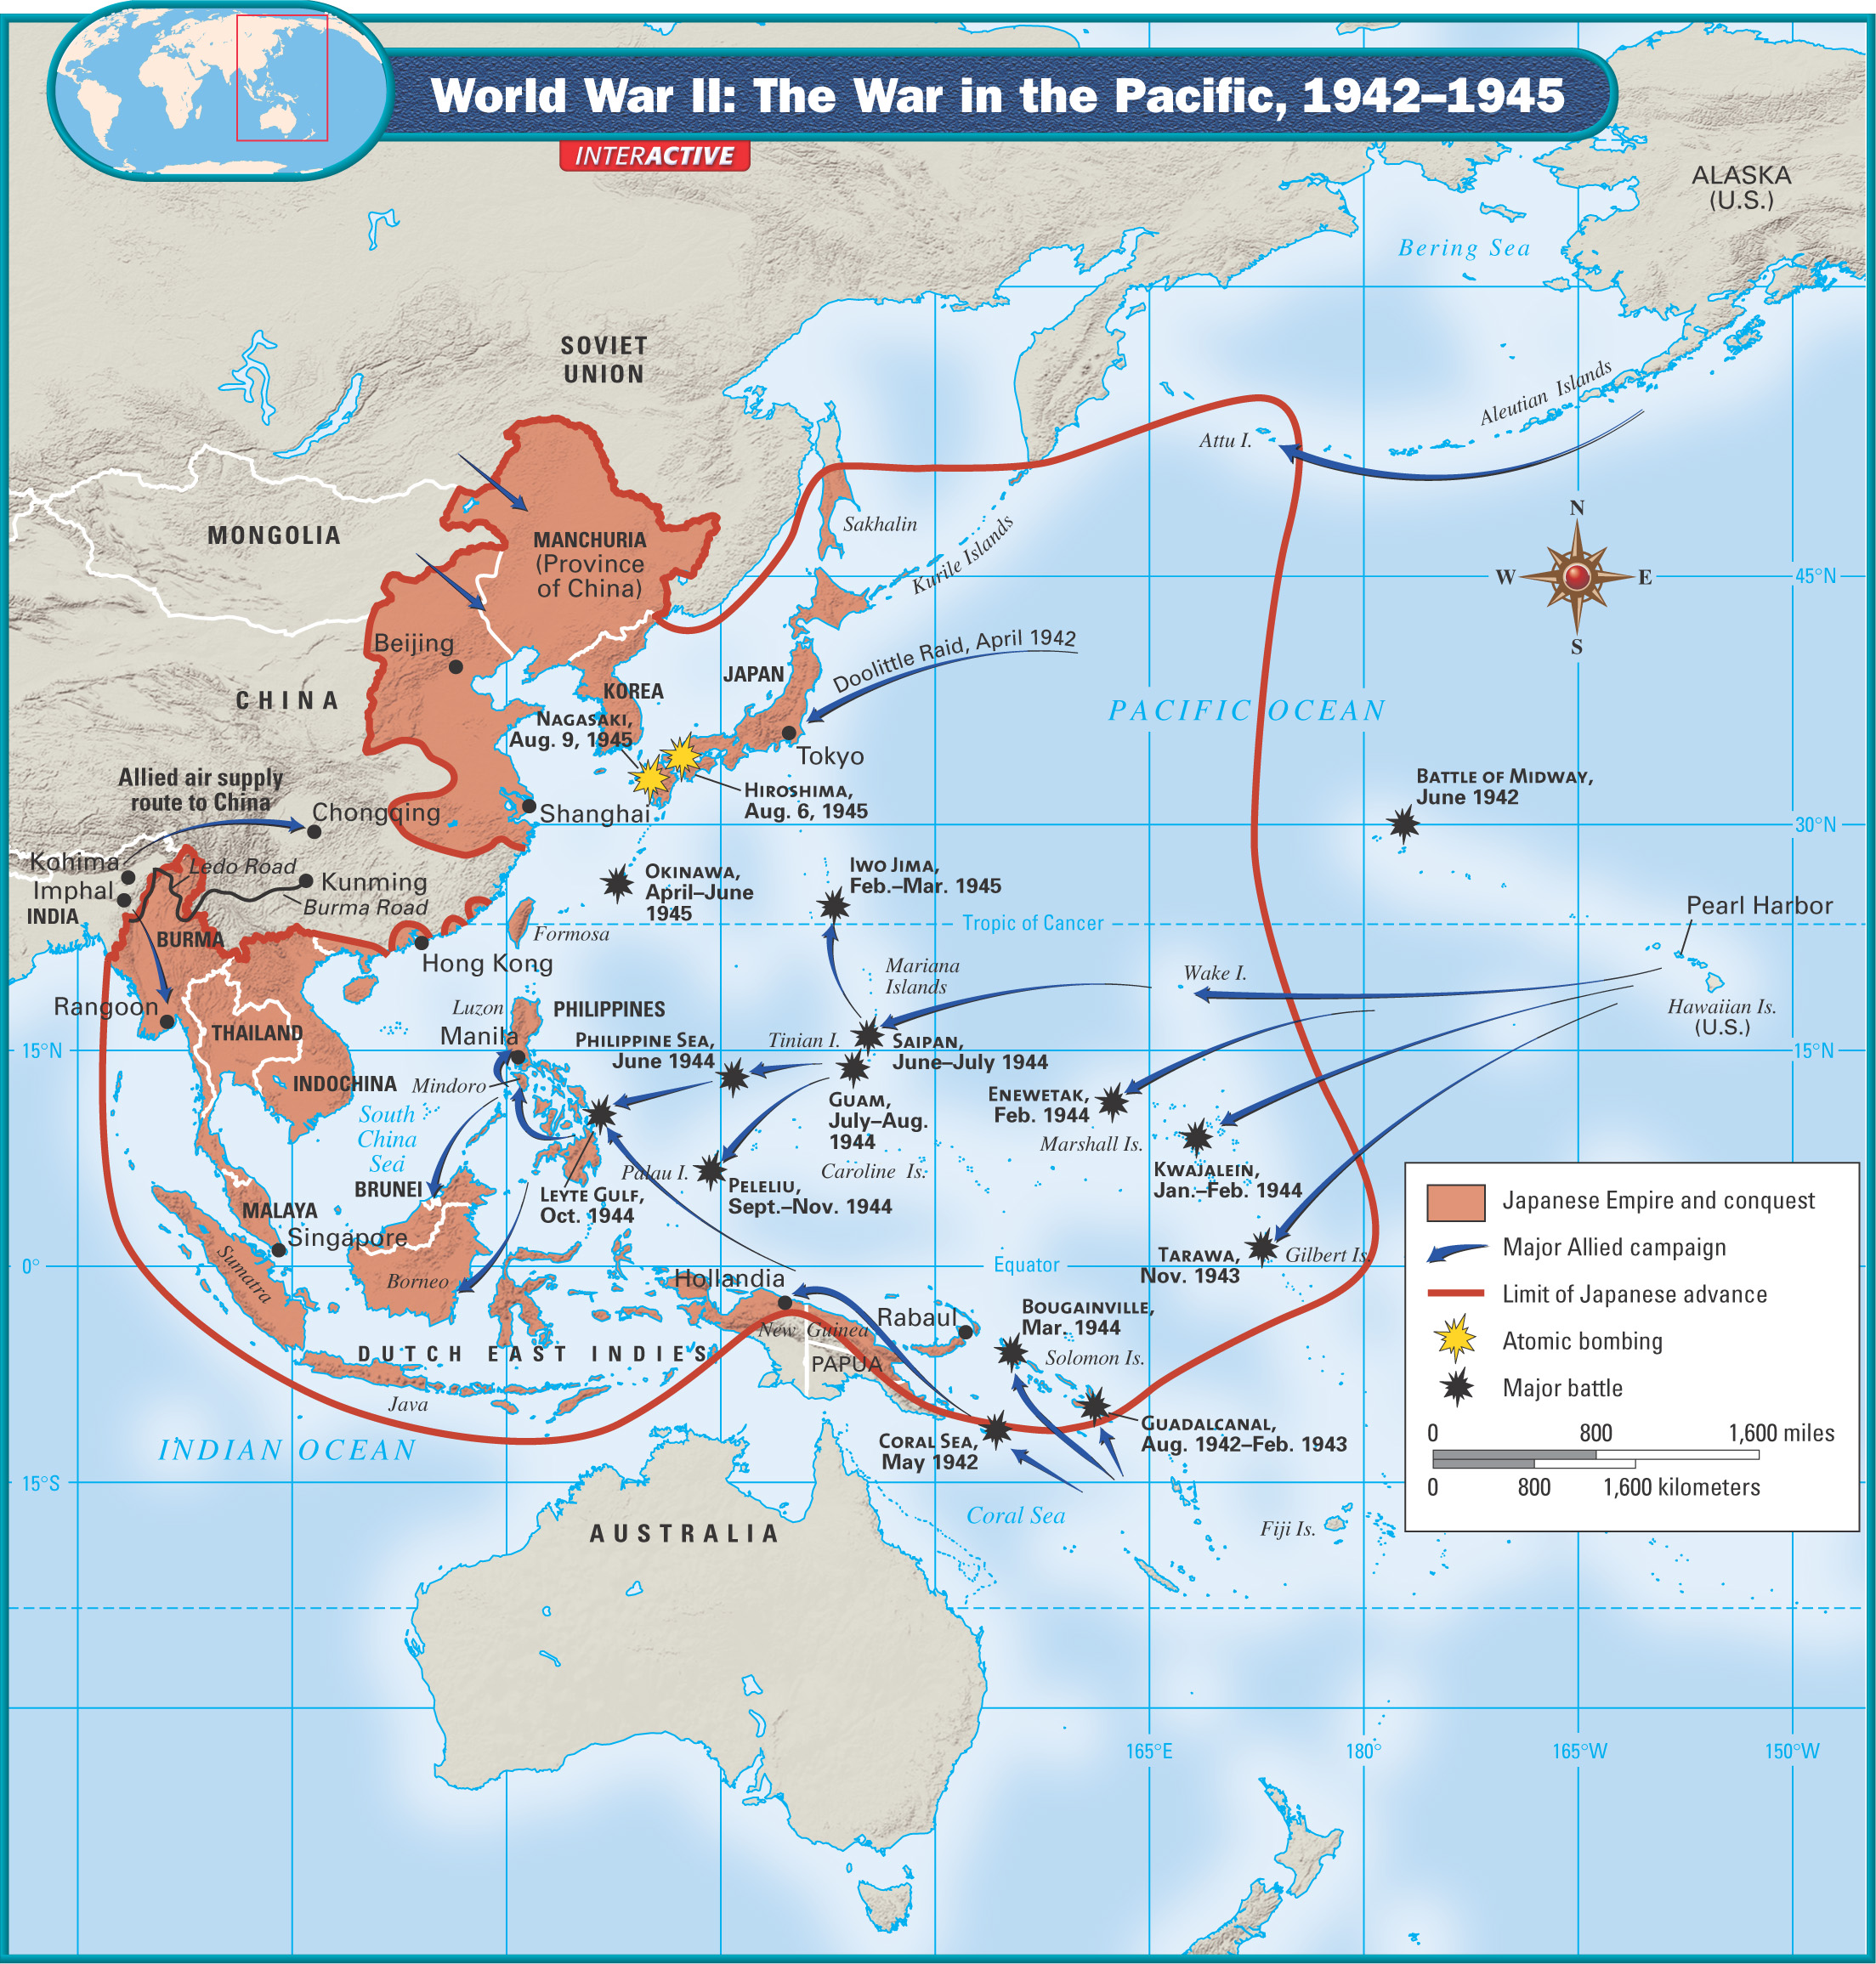 Map: World War II, The War in the Pacific 1942 - 1945